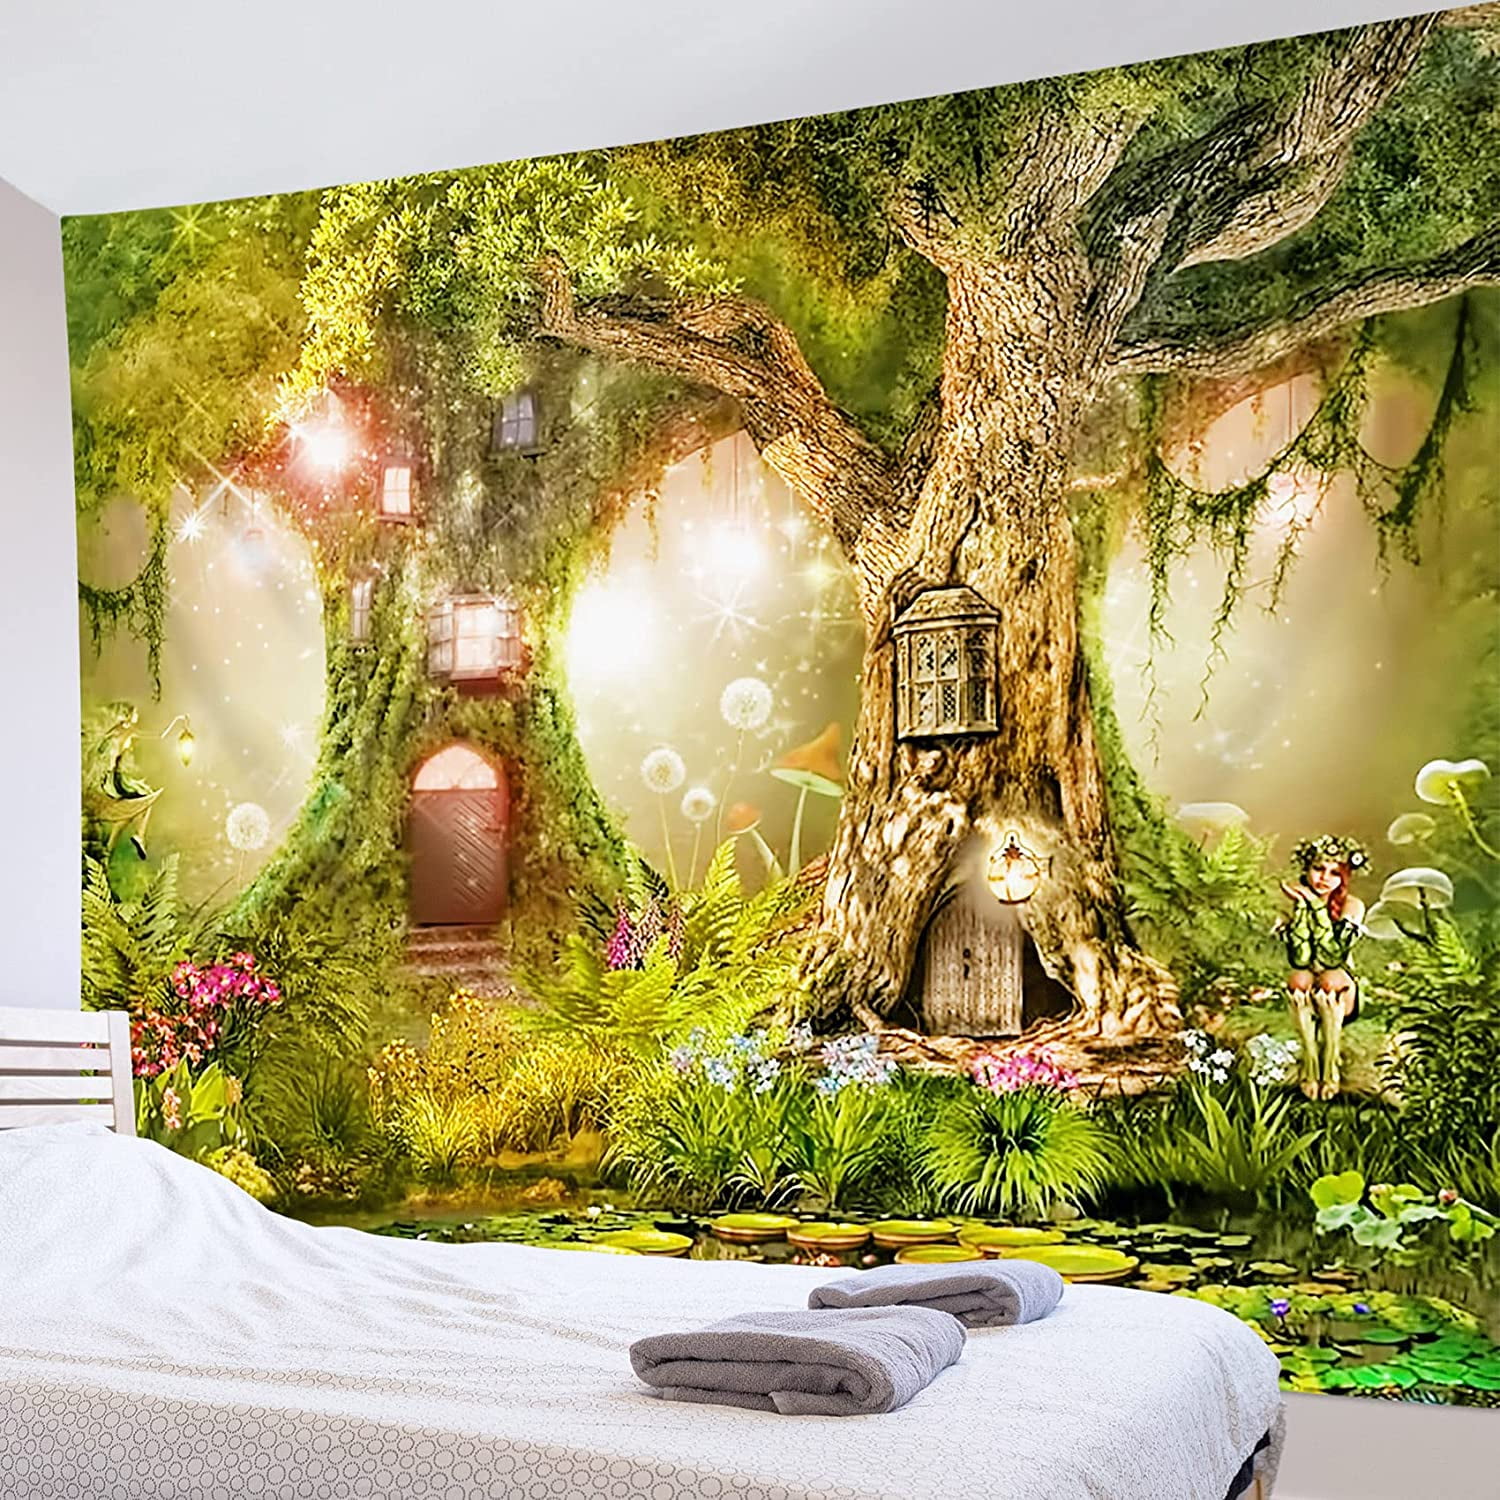 Magic Fairy Tale Elf Forest Tapestry Wall Hanging Dorm Home Decor Art Bedspread 